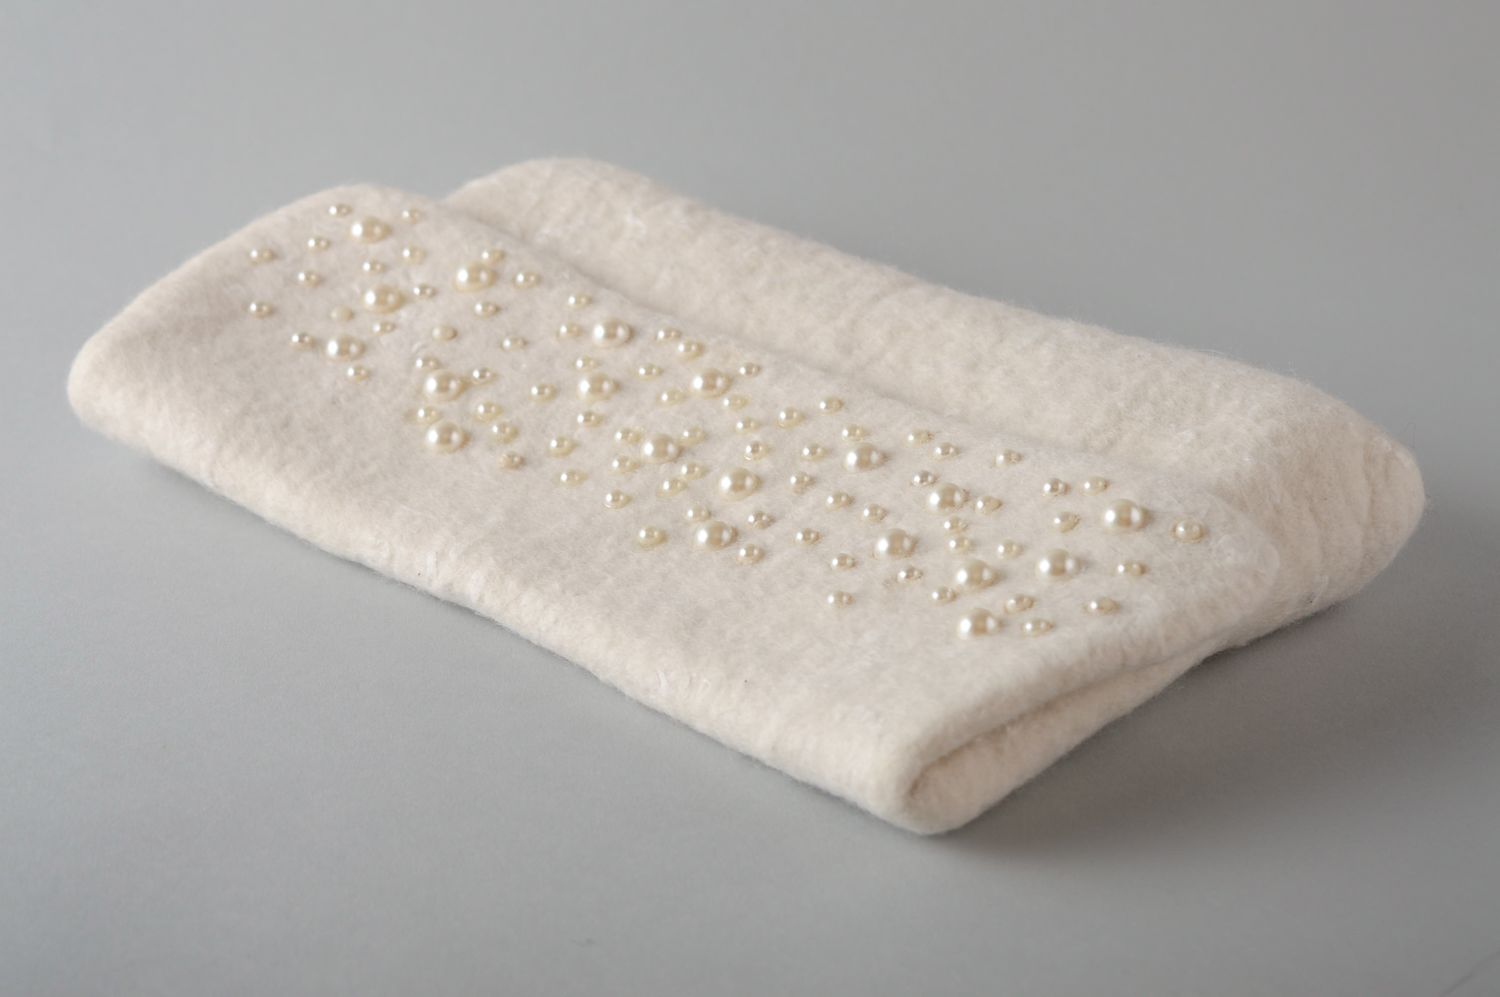 Handmade white felted wool clutch with beads photo 2